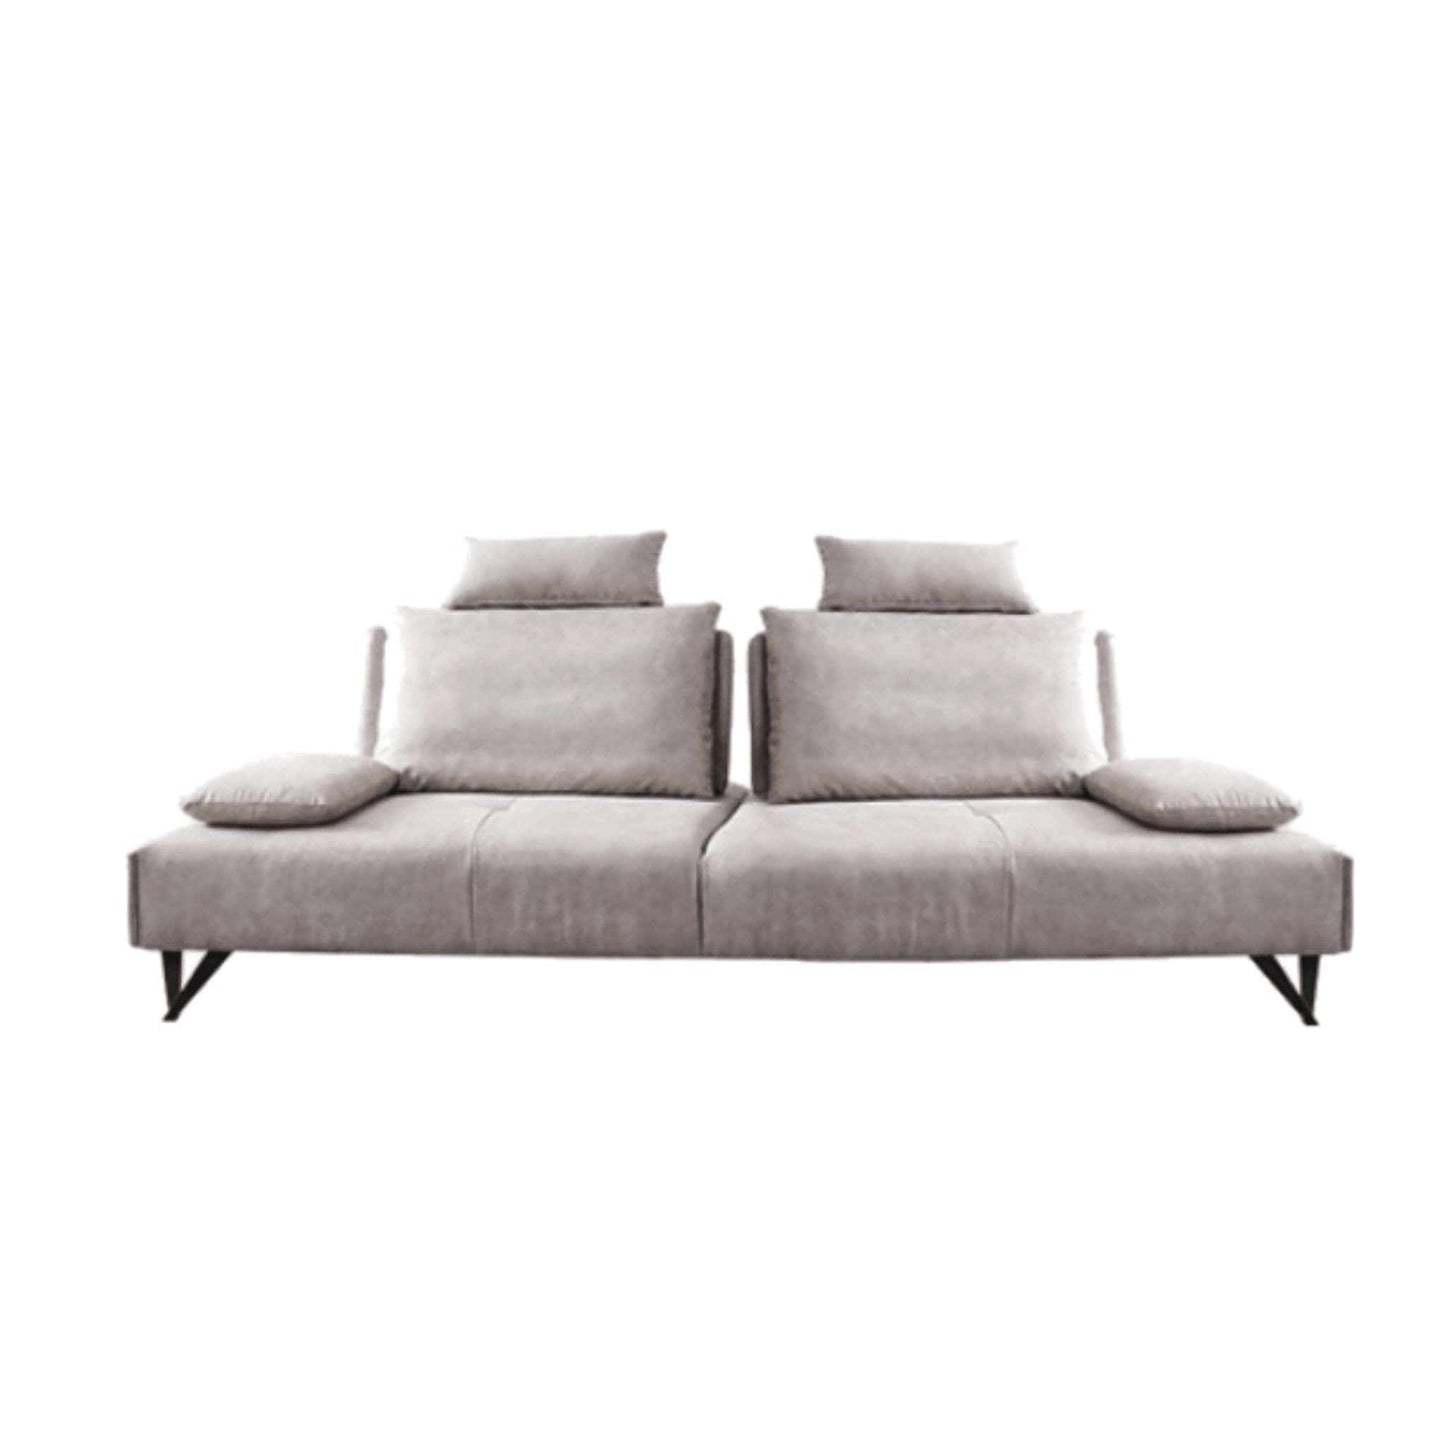 home-atelier-f31a Leather-Aire / 2 seater/ Length 200cm / Dark Grey Tallini Slider Sofa